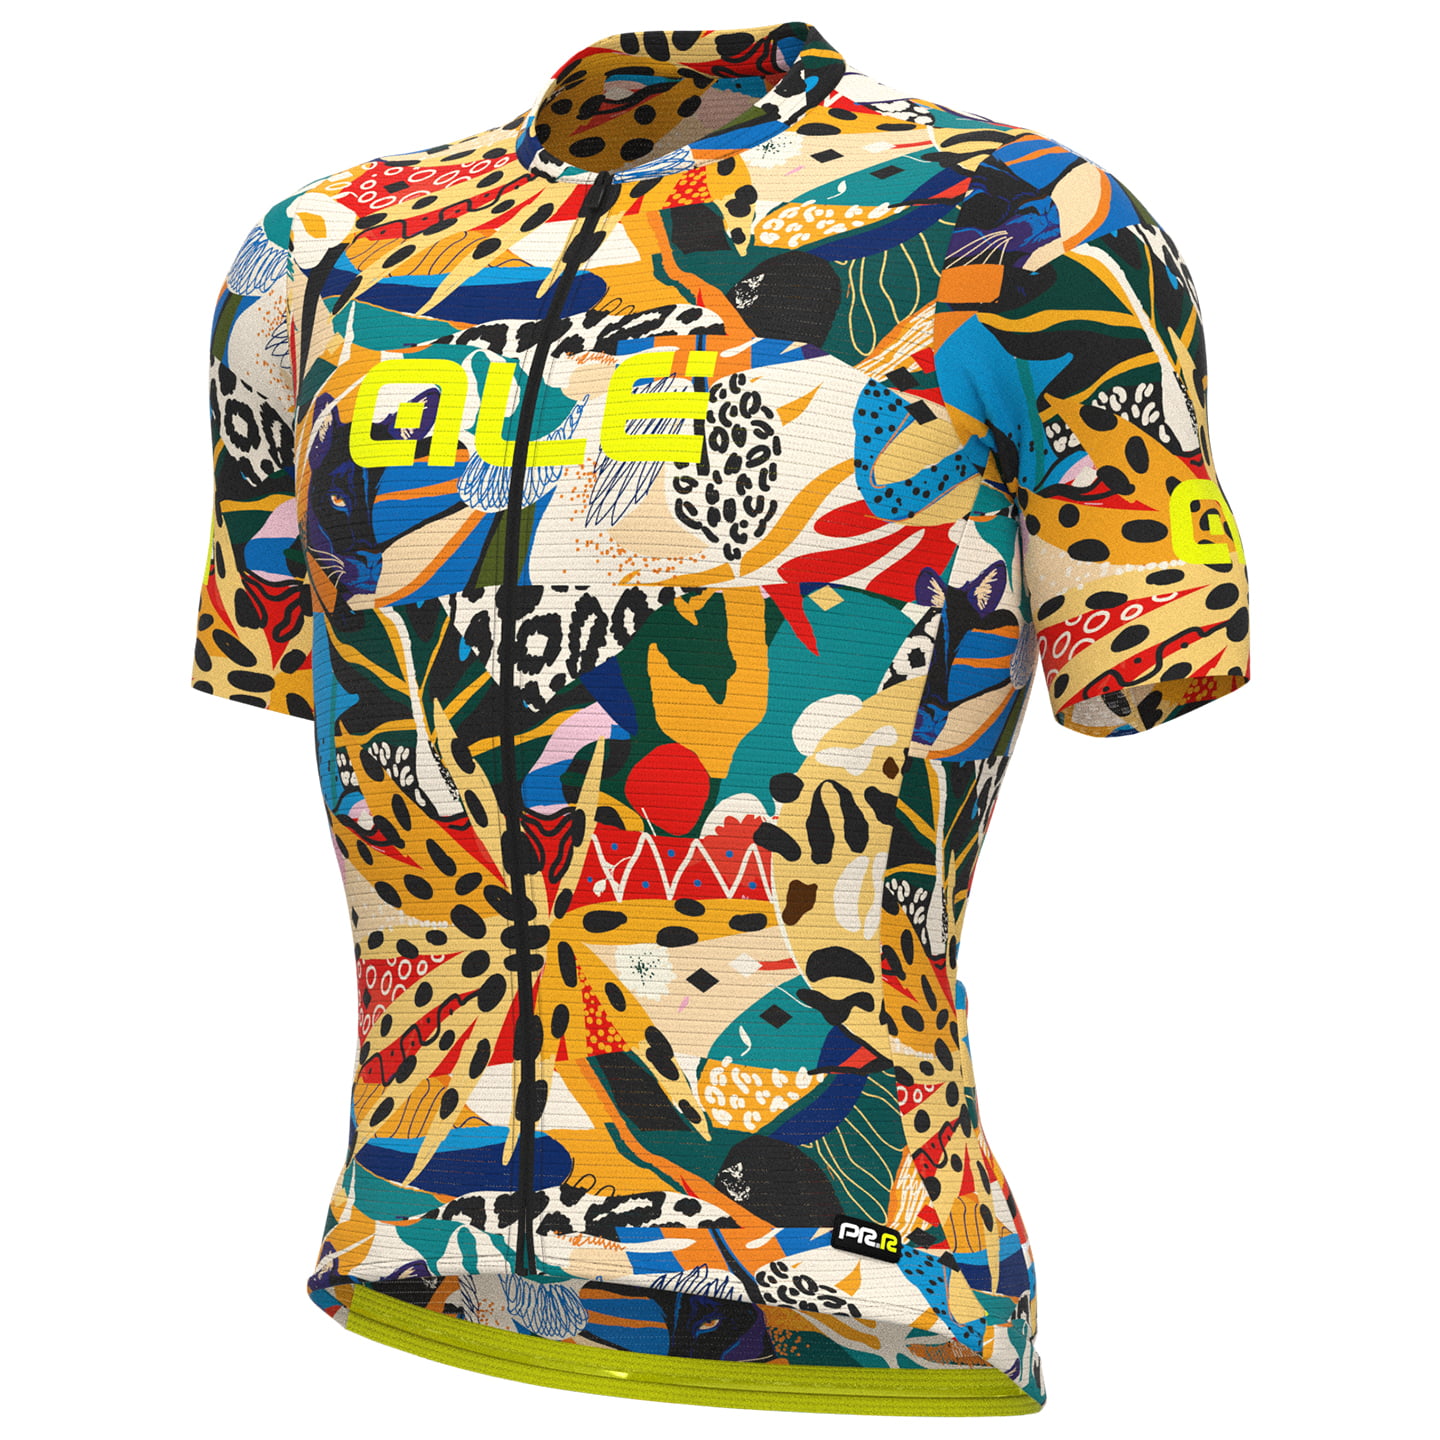 ALE Kenya Short Sleeve Jersey Short Sleeve Jersey, for men, size 2XL, Cycling jersey, Cycle clothing